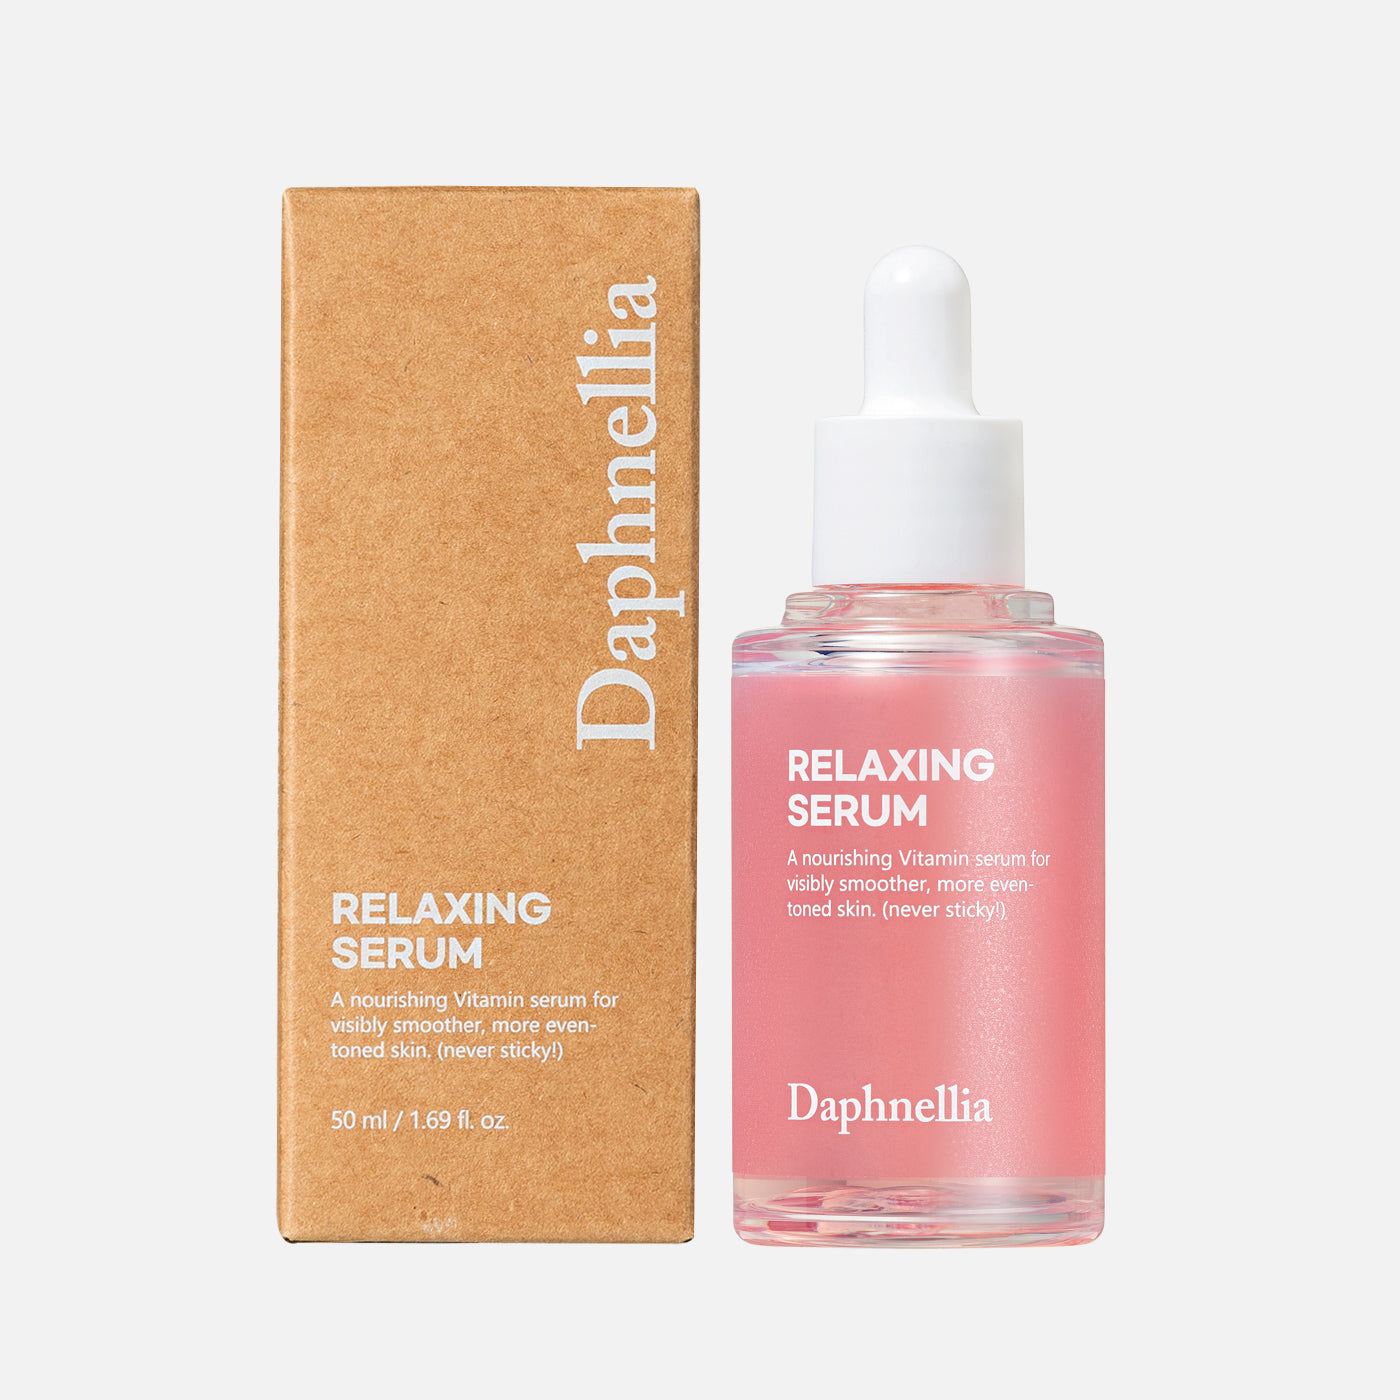 DAPHNELLIA Relaxing Serum on sales on our Website !